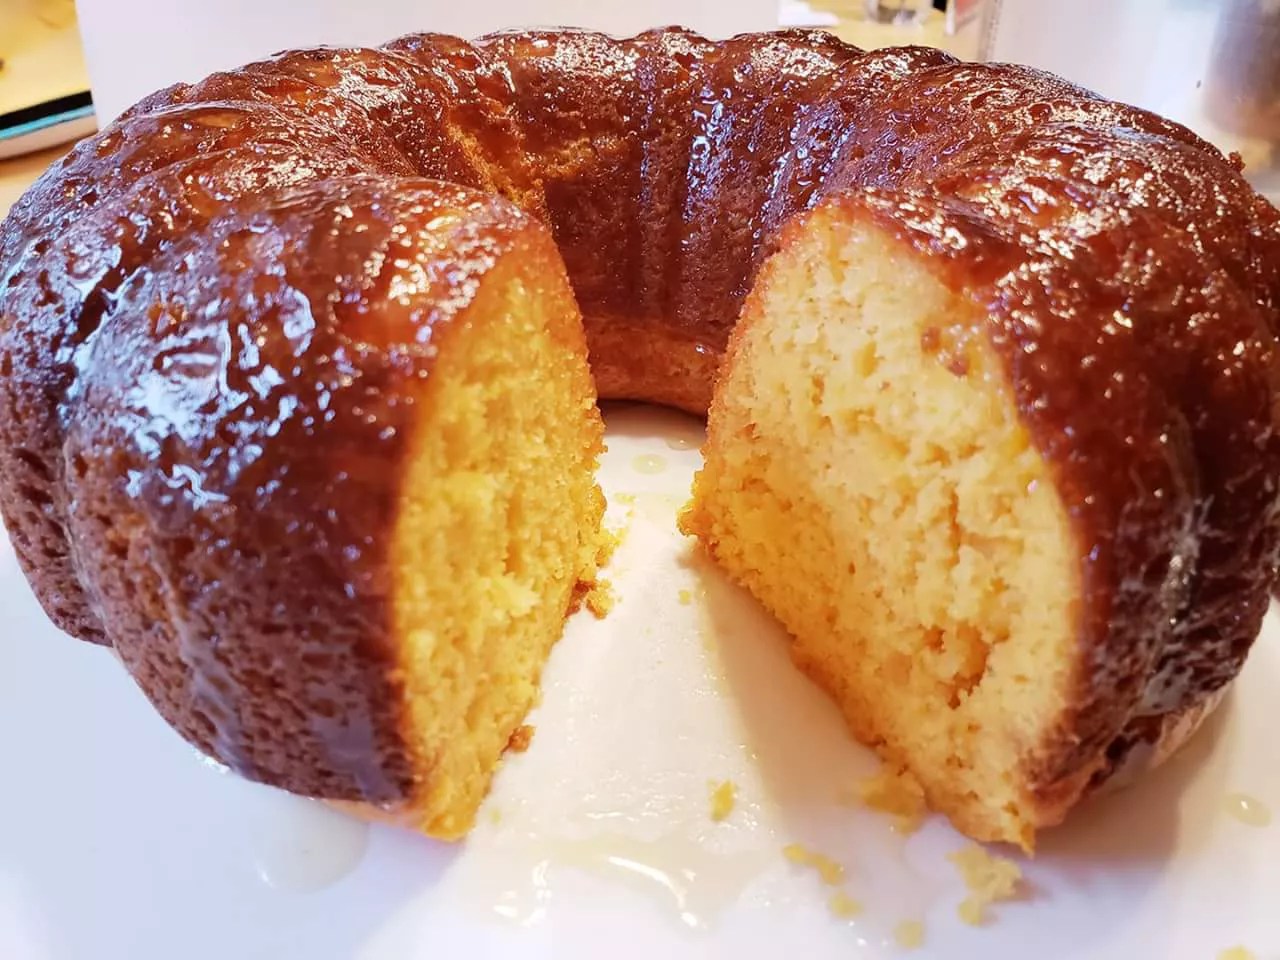 Irresistible Orange Cake Recipe – Perfectly Moist and Citrus Inf